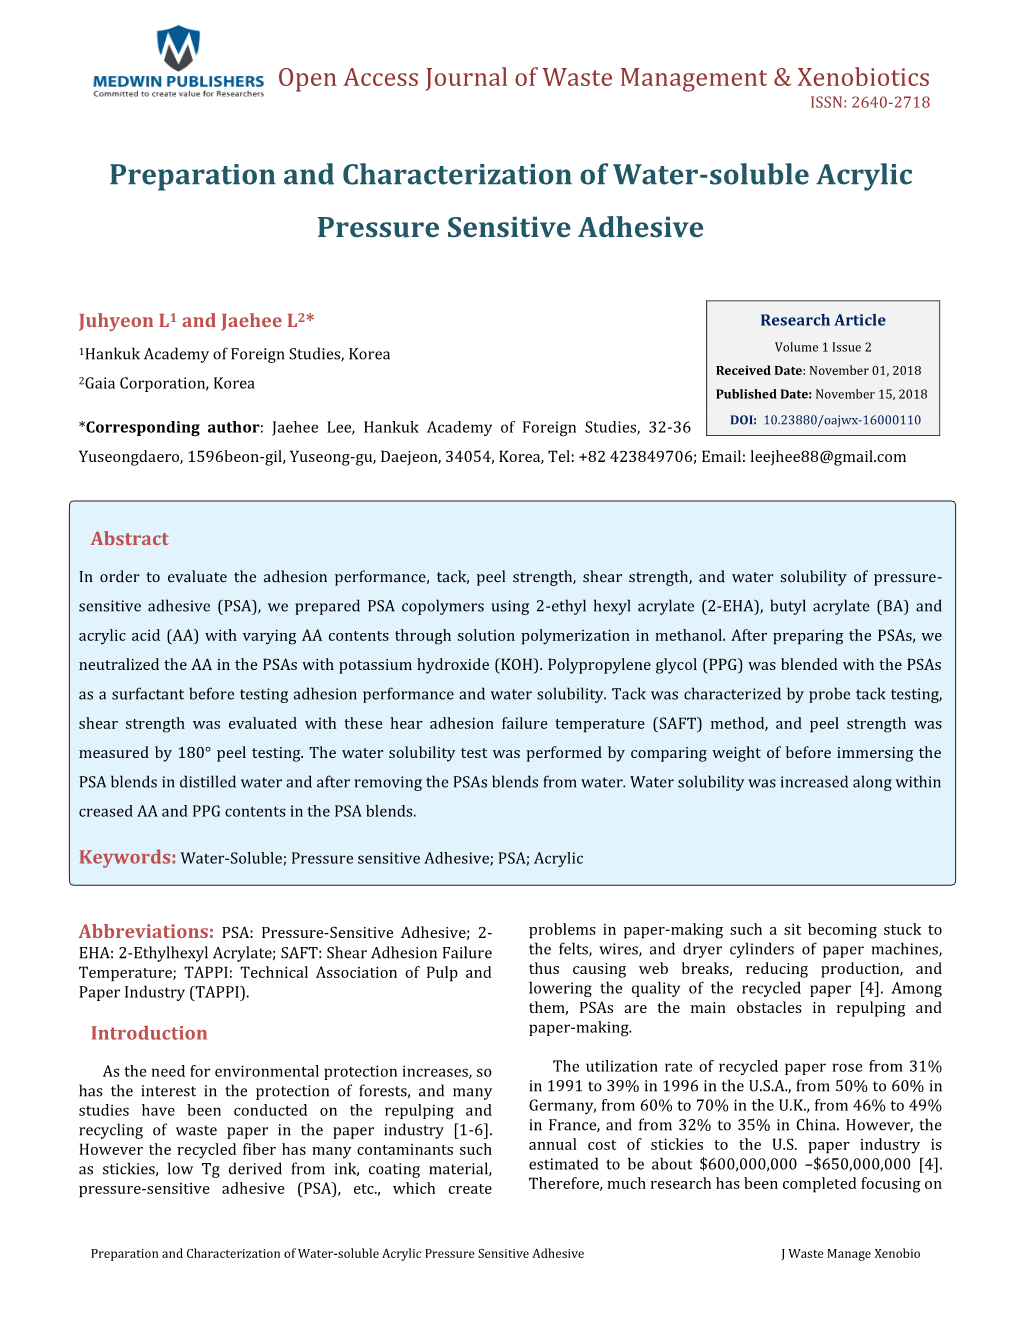 Preparation and Characterization of Water-Soluble Acrylic Pressure Sensitive Adhesive